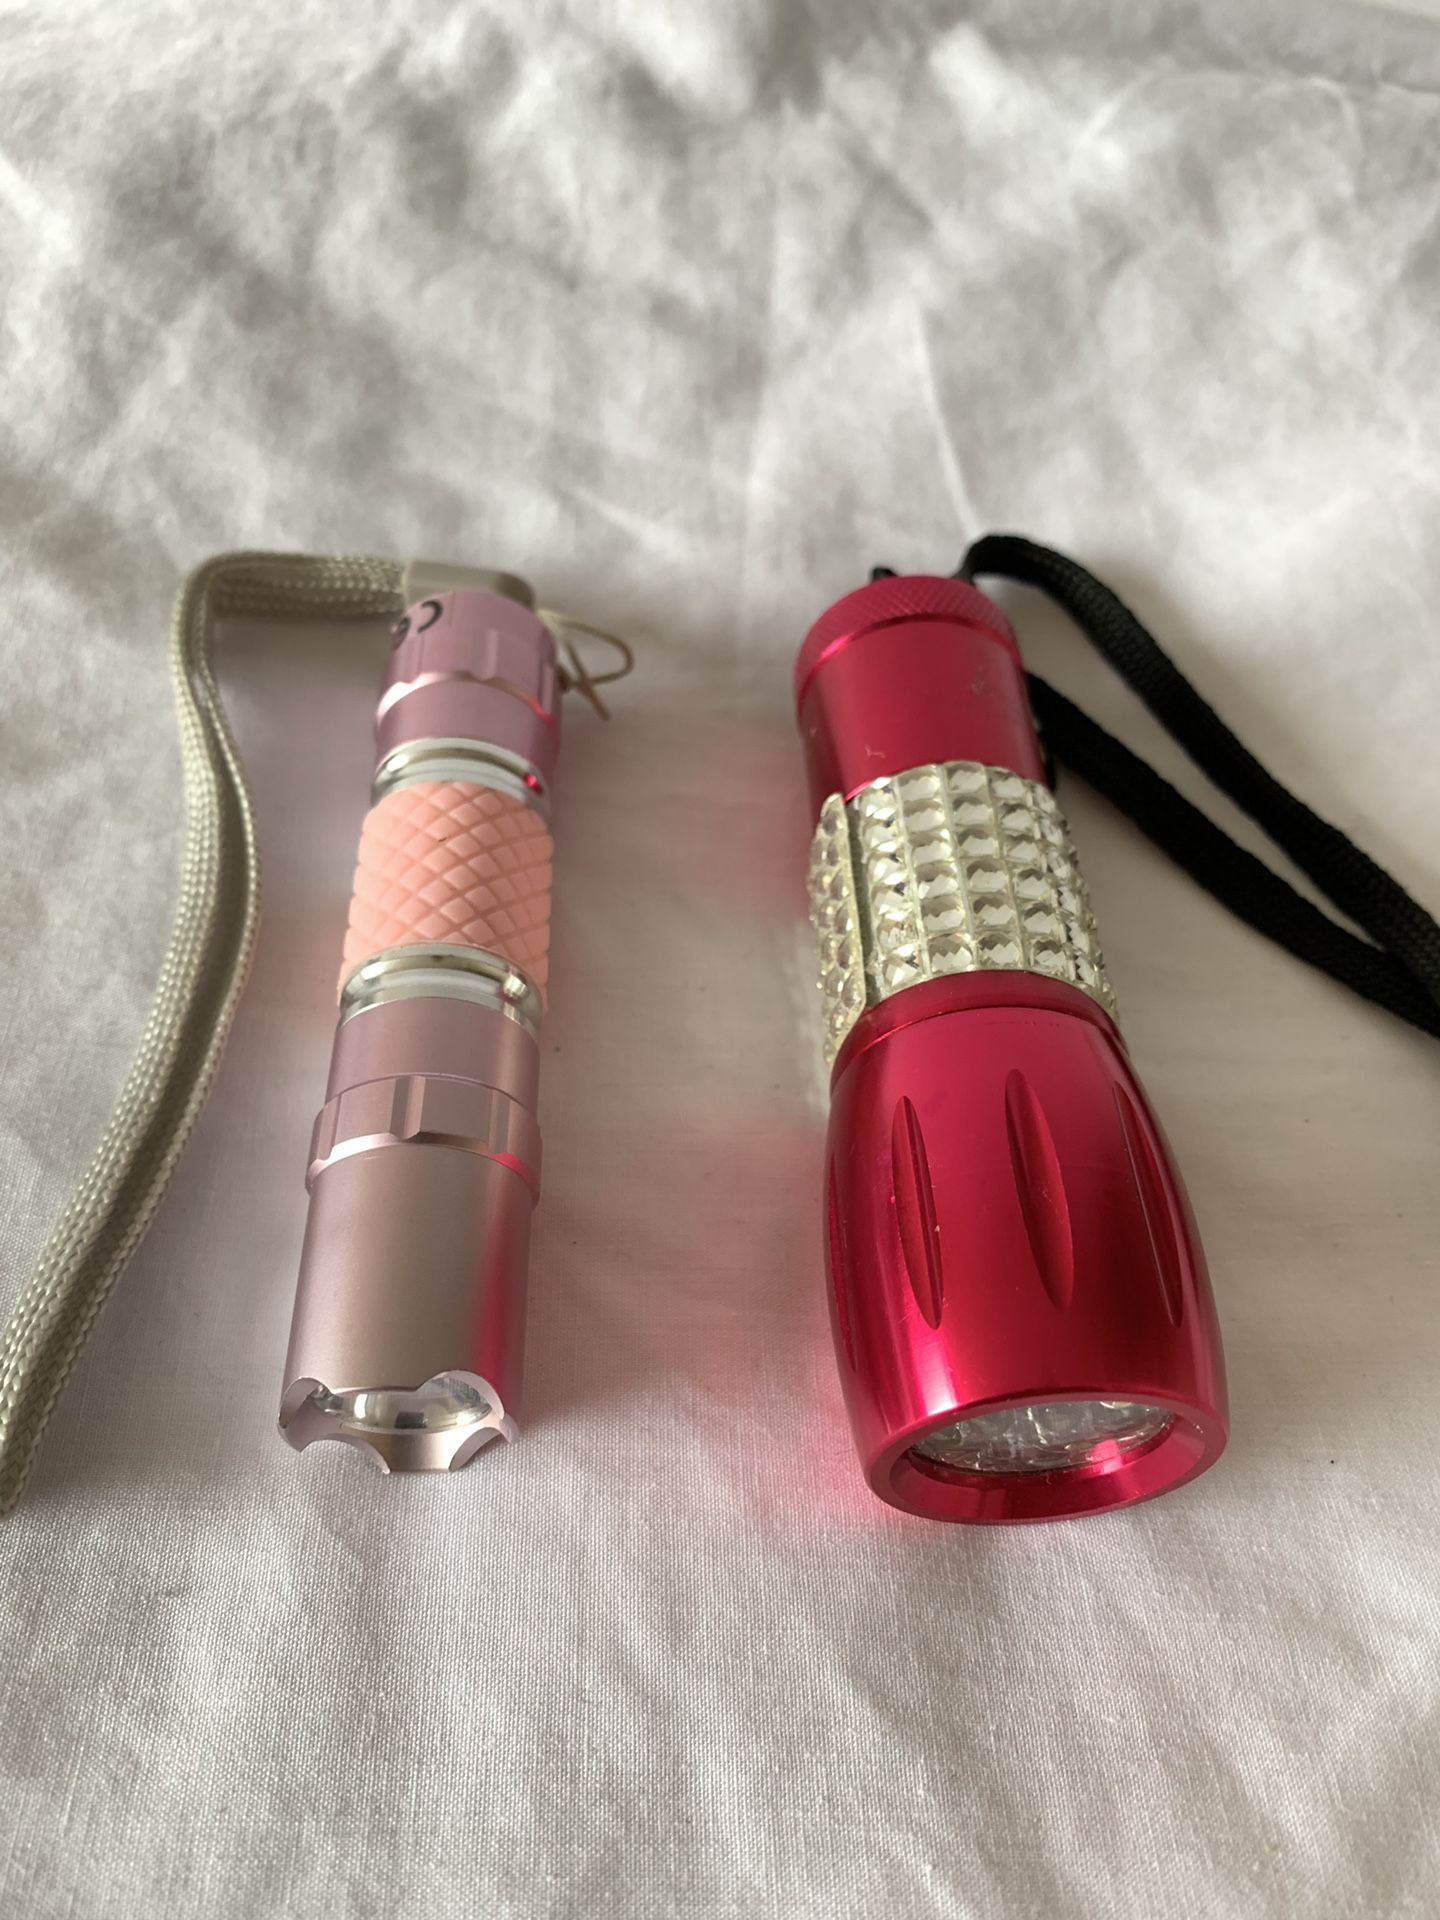 LED flash lights with batteries